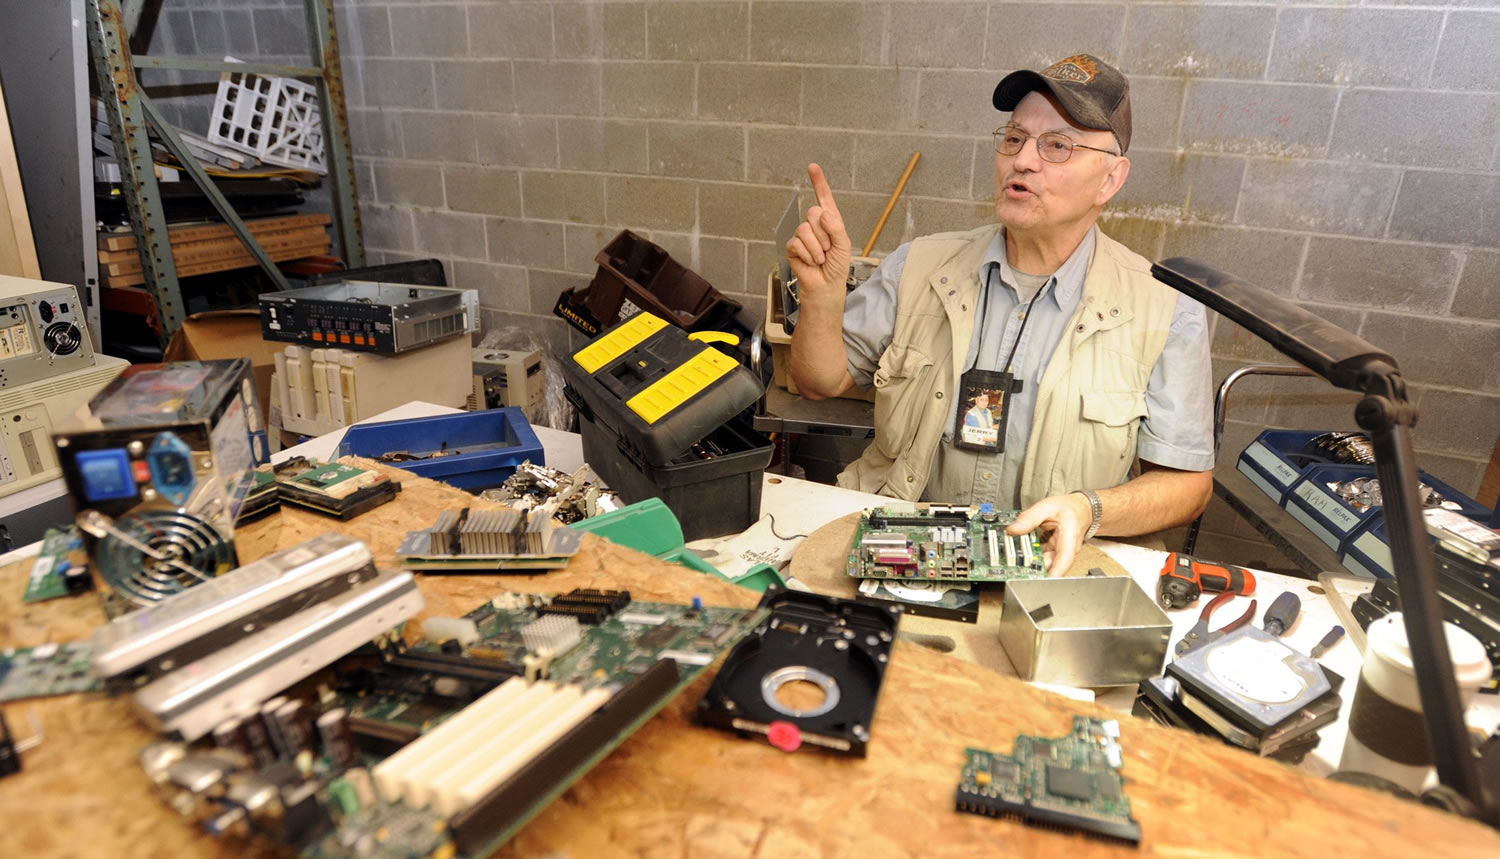 Volunteer Jerry Kurtti found his way to Empower Up, a nonprofit technology recycler, via the Retired Senior Volunteer Program, based in Hazel Dell.